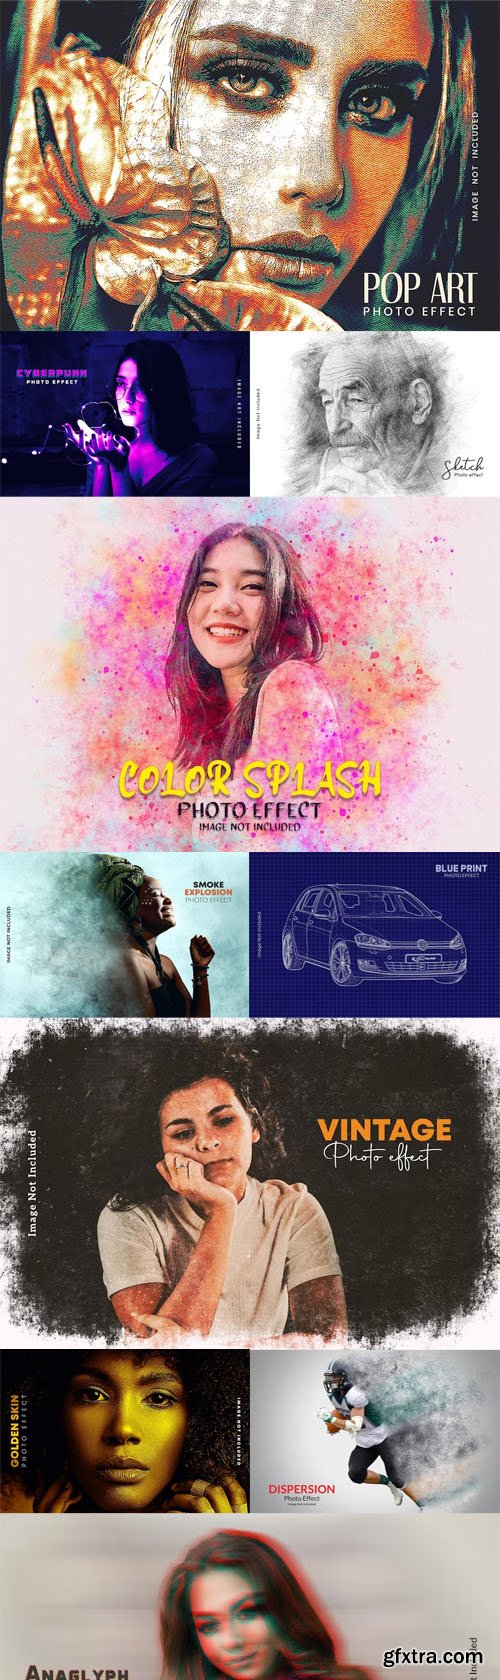 Awesome Premium Photo Effects for Photoshop [Vol.4]